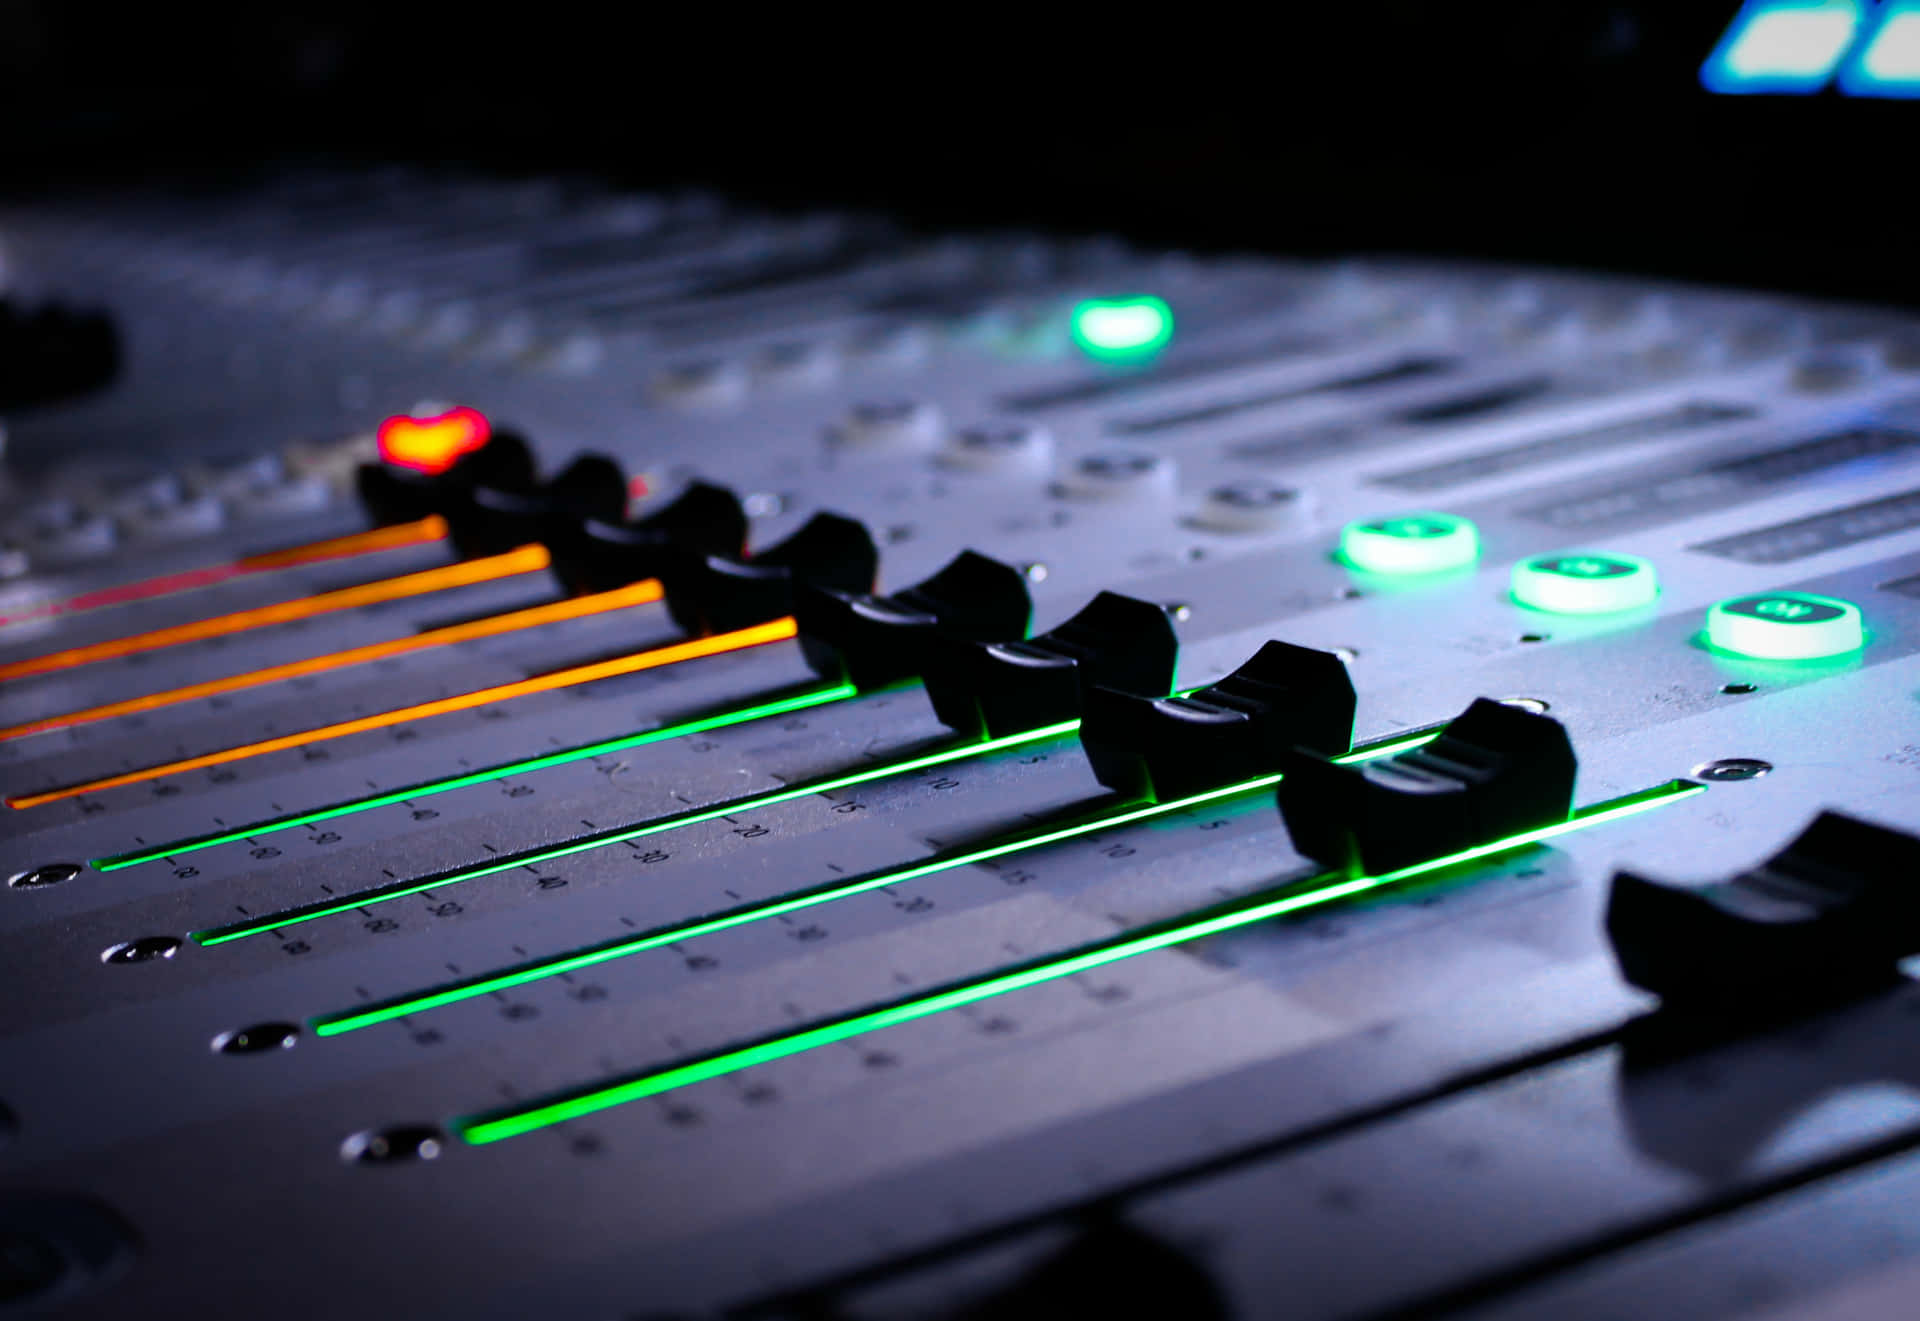 A Black And White Image Of A Mixing Board